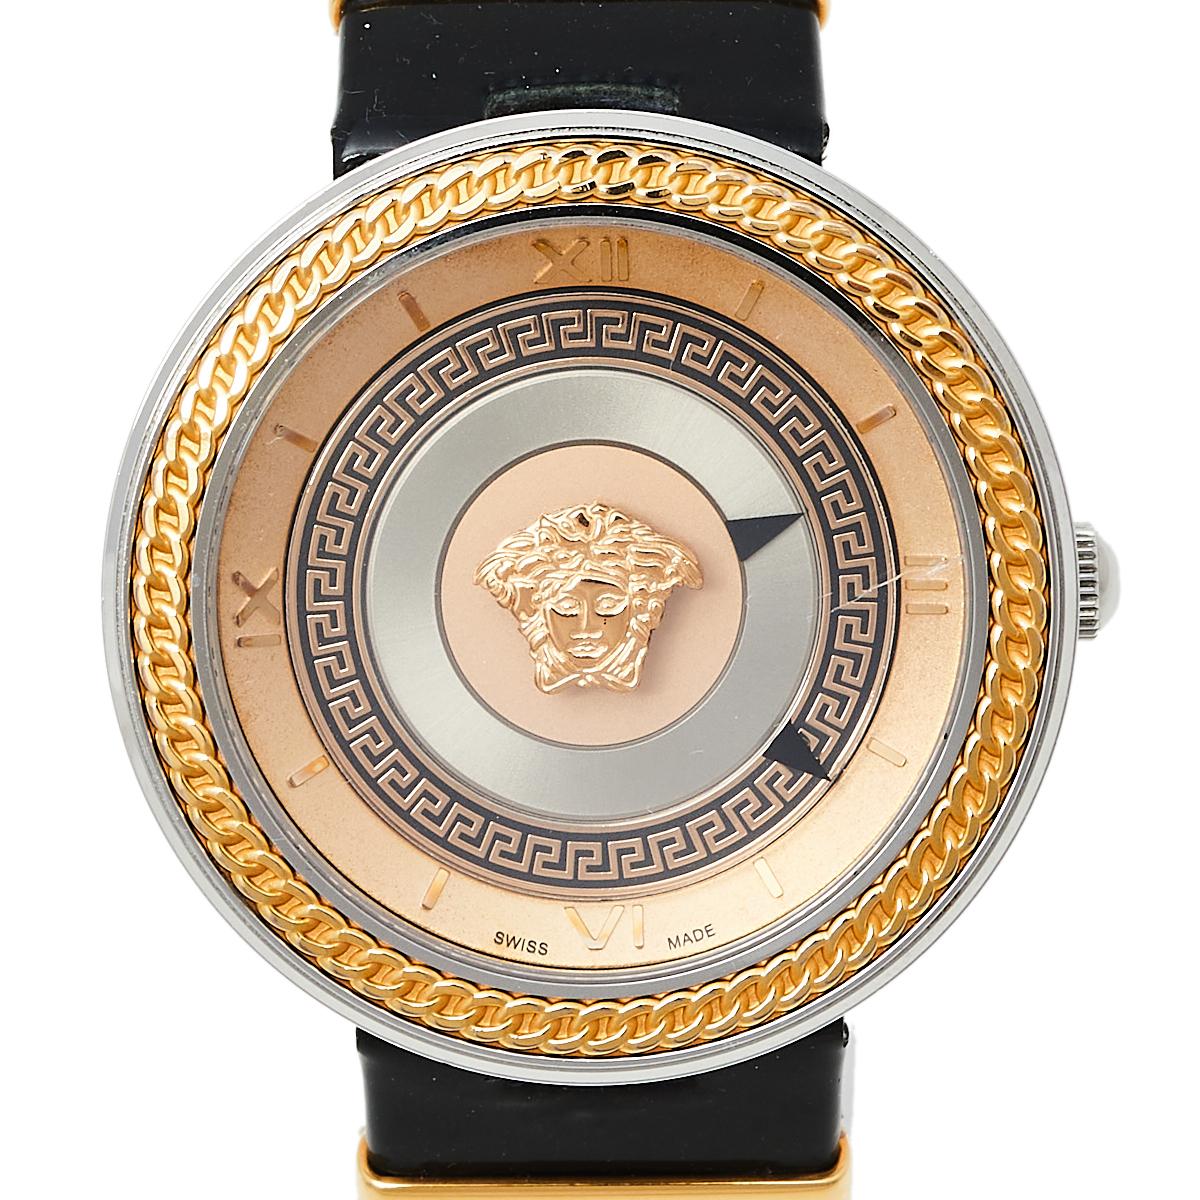 Carefully crafted using two-tone stainless steel, Versace's V-Metal Icon watch has a statement look. It has a magnificent bezel and a beautiful dial centered with the Medusa emblem. The round case is held by a leather bracelet.

